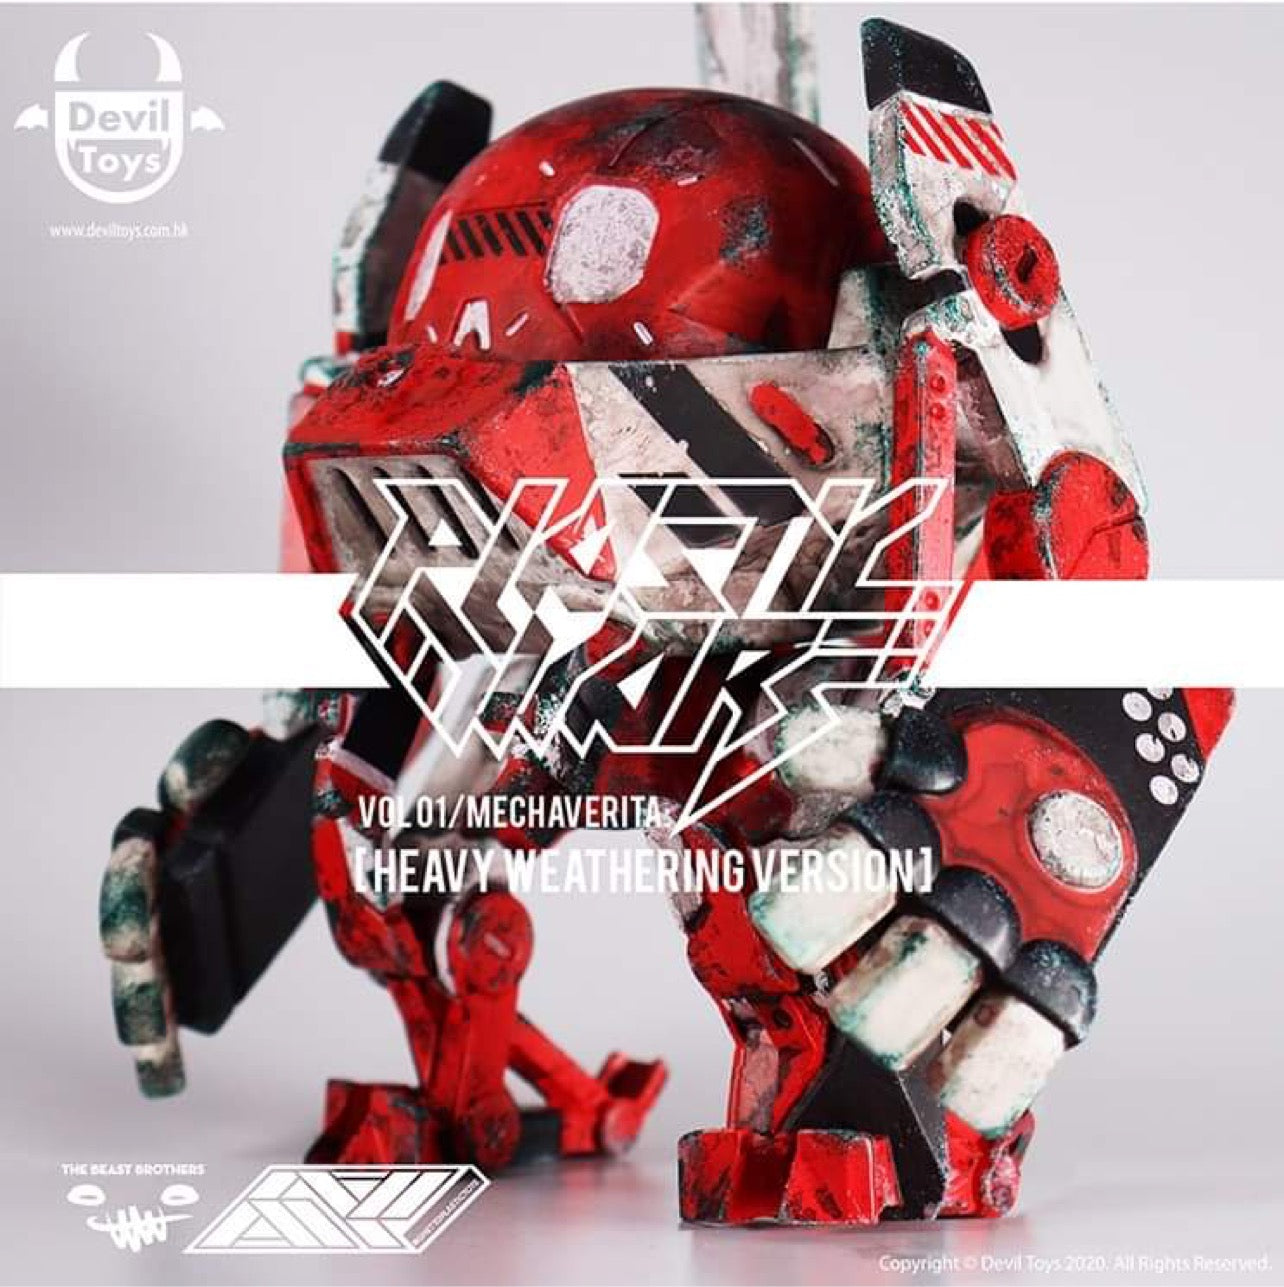 01//MECHAVERITA - Heavy Weathering Version by The Beast Brothers x Ghetto Plastic